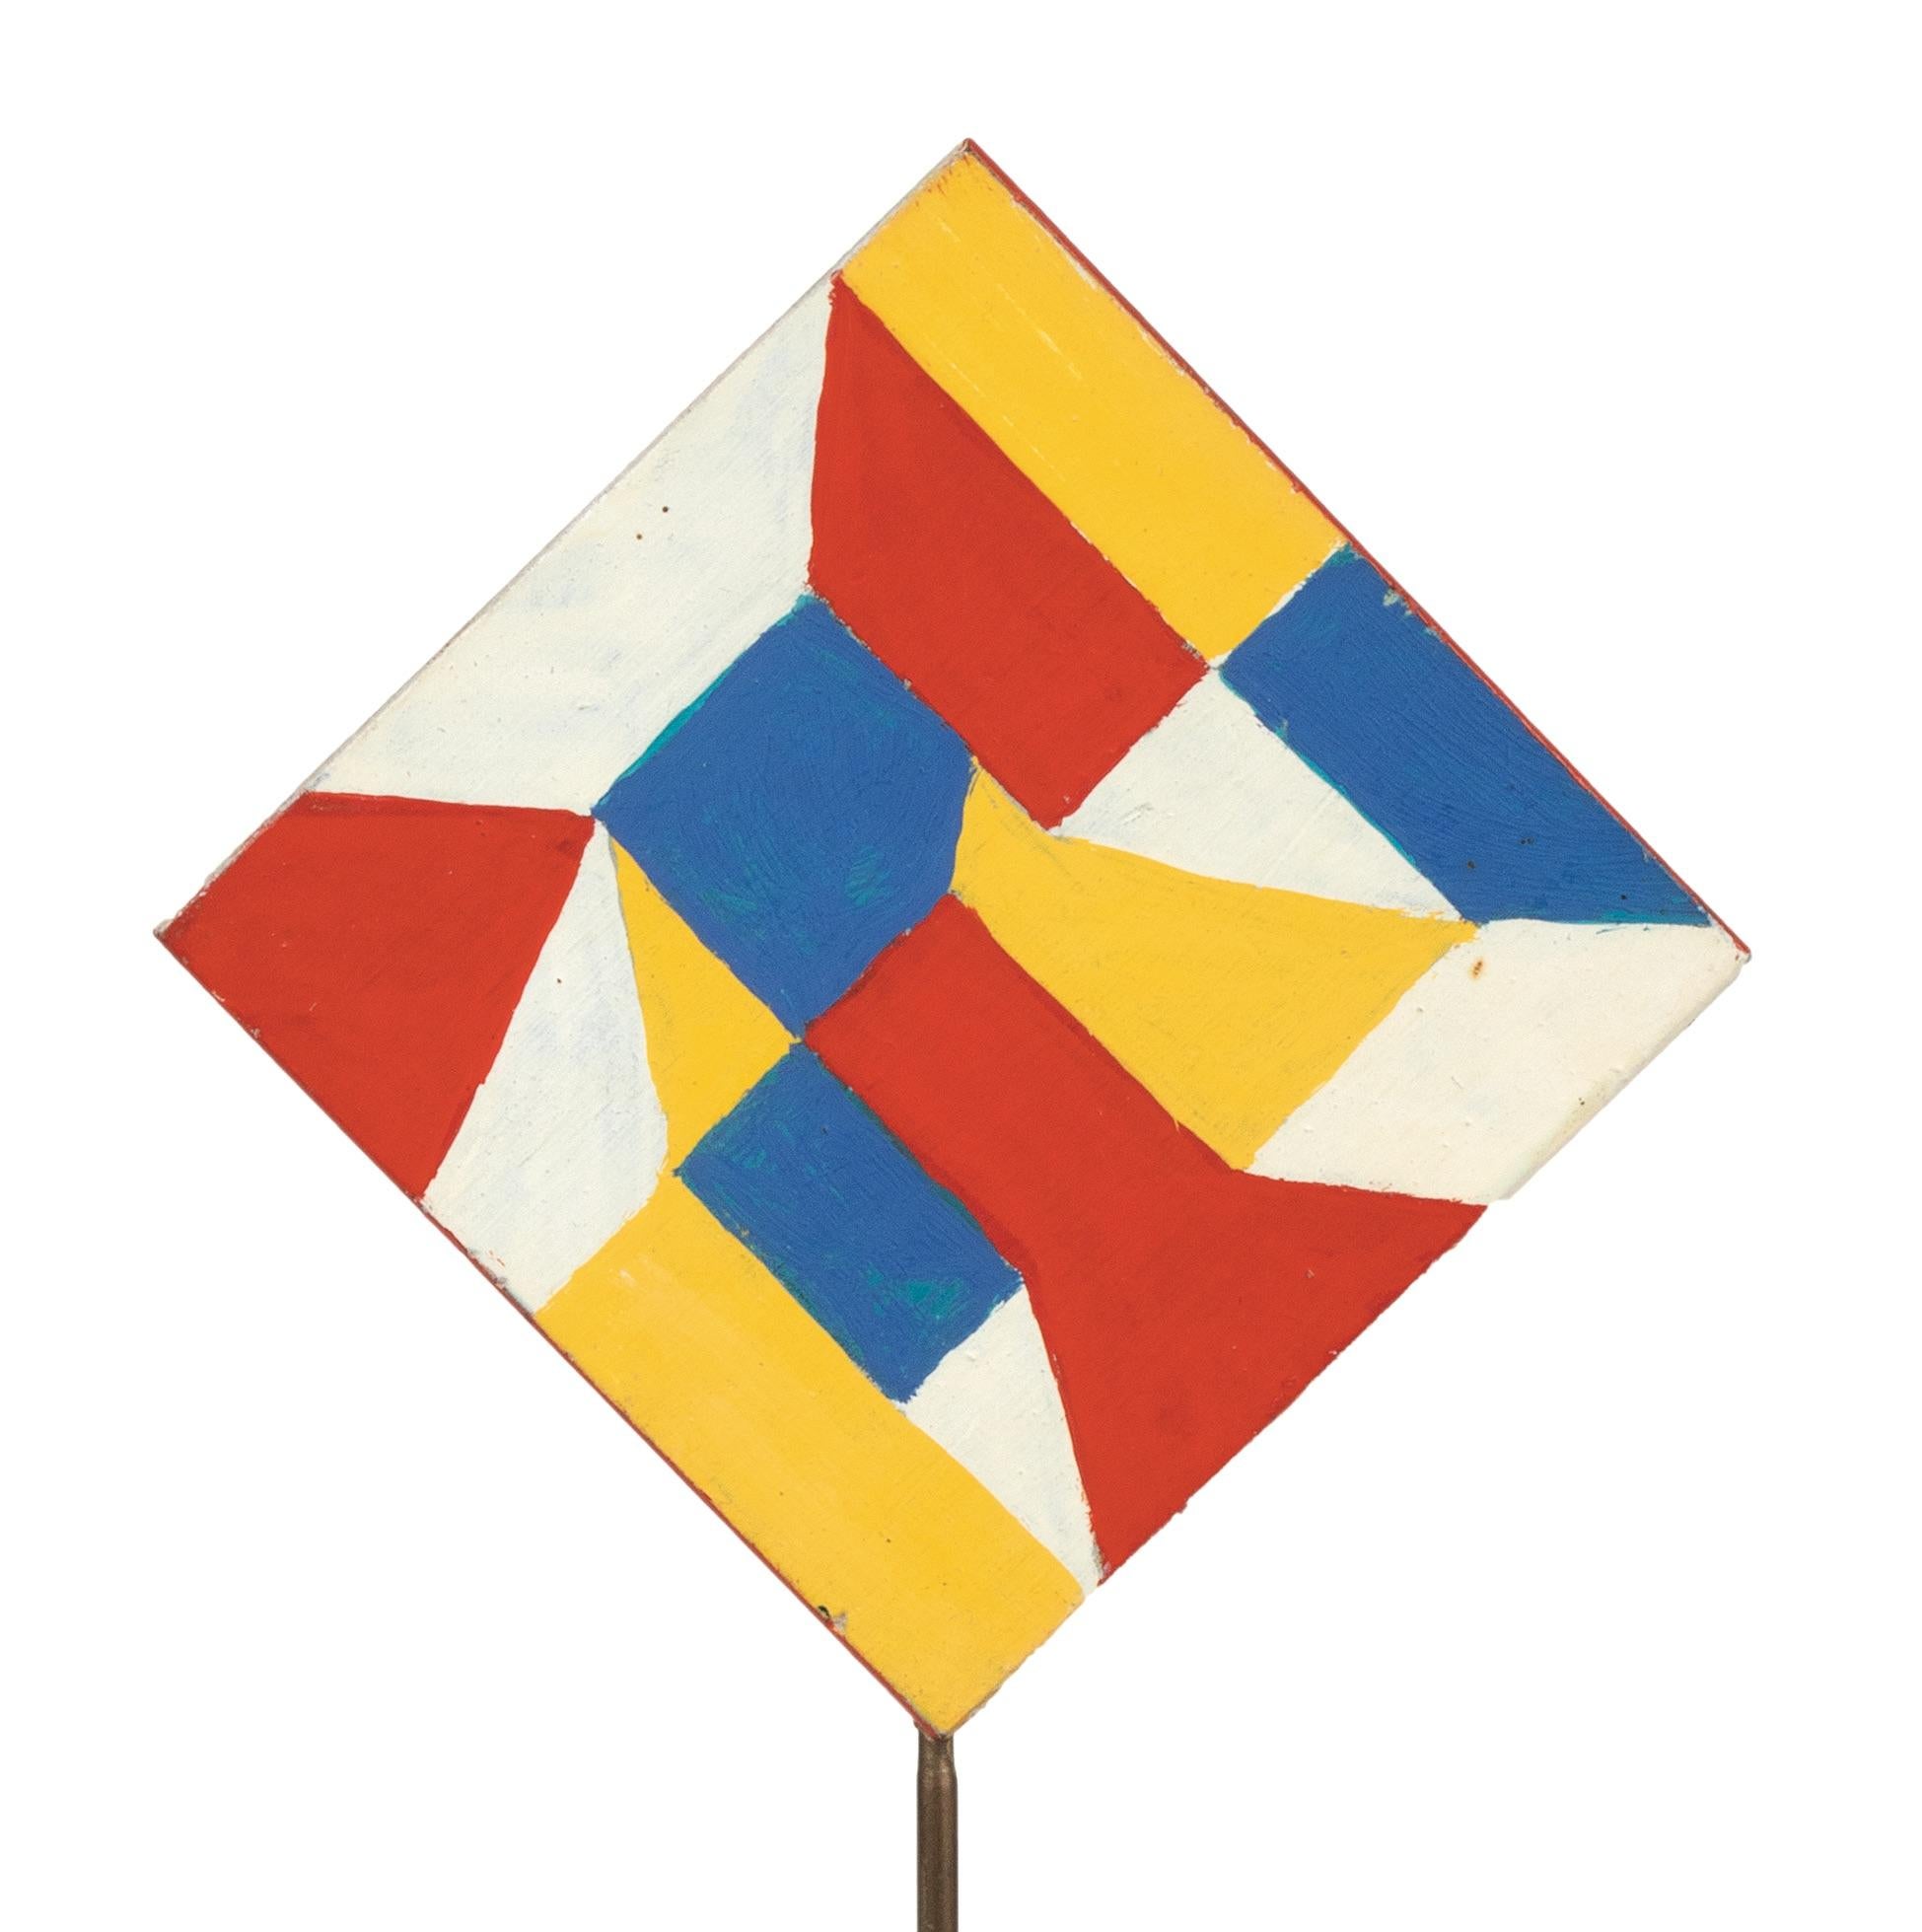 The 'Red and Blue Triangles'  by Giacomo Balla (1871-1958), with re, blue and yellow Shapes (verso) and red and blue triangles(recto), realized in the 1930s.

Tempera on wood, aluminium structure and plastic base, 20 x 11 cm (21,5 x 11 cm with the